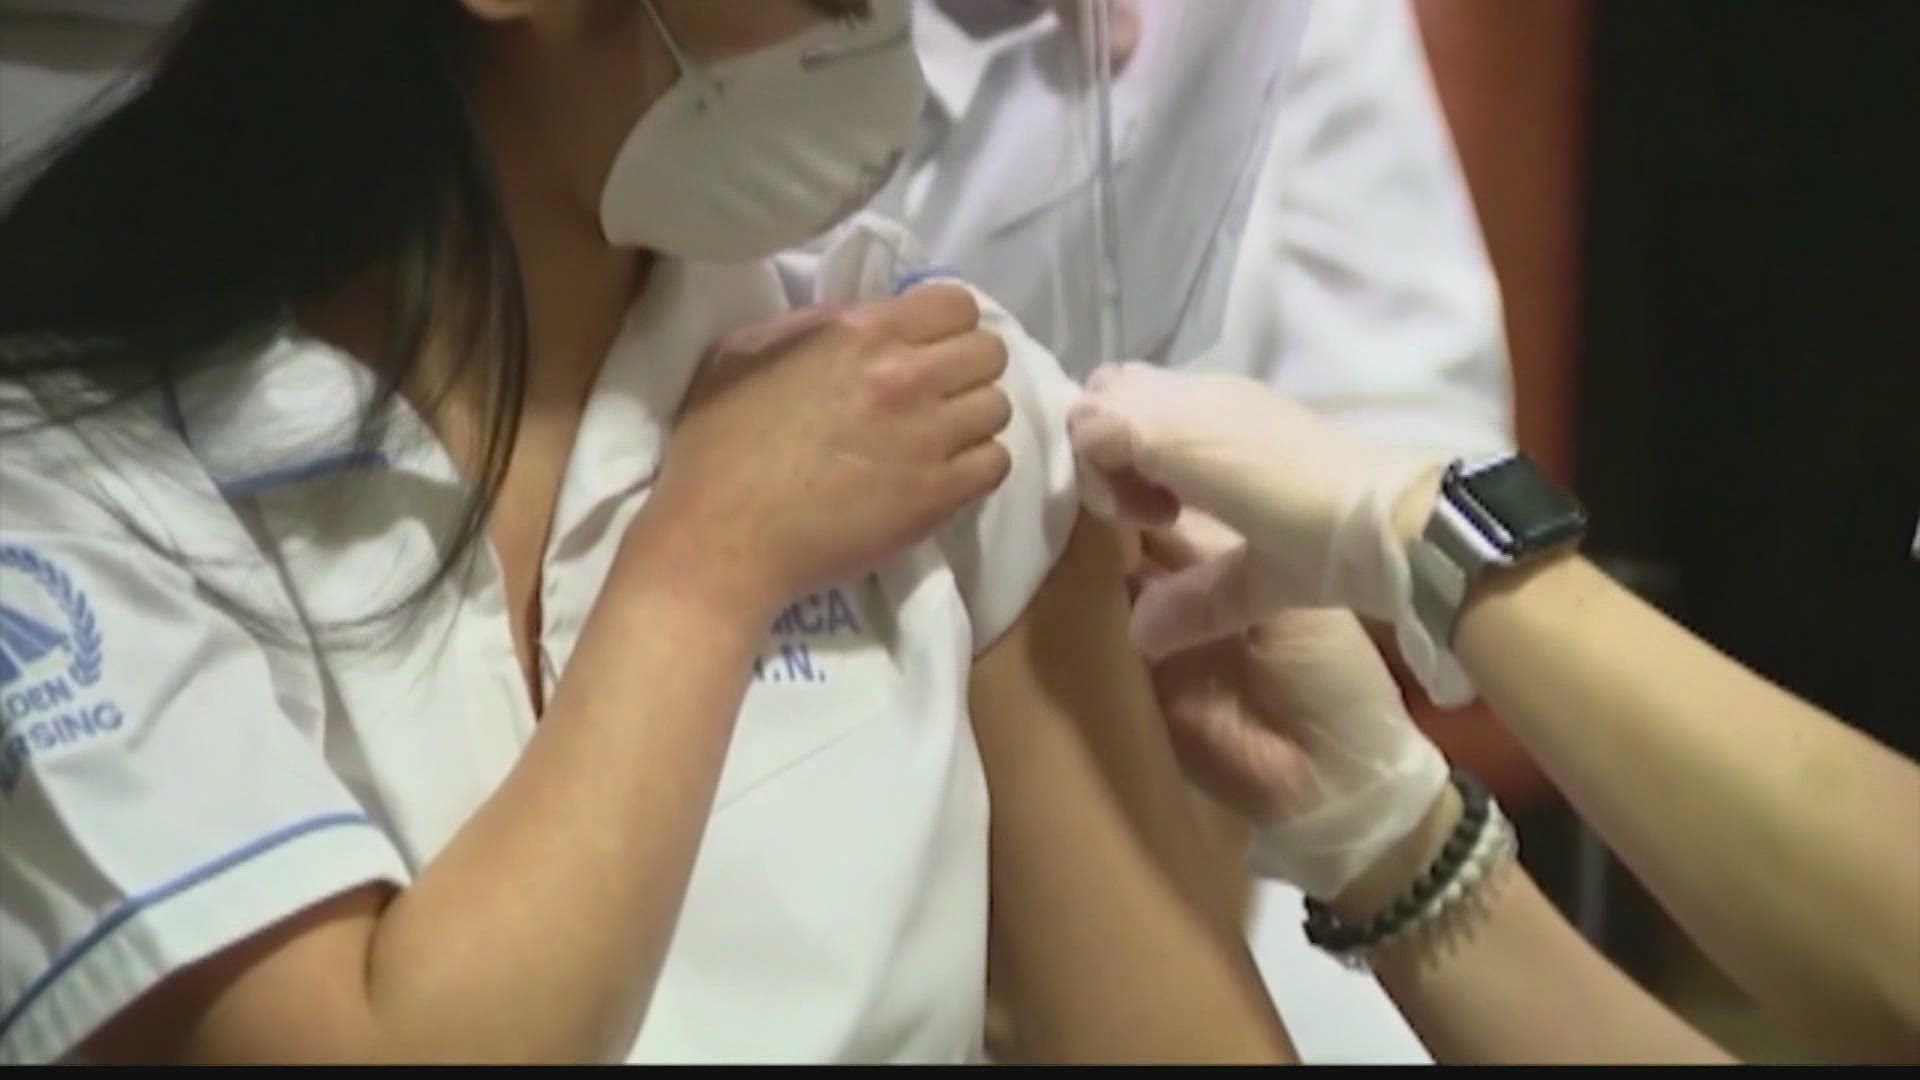 Doctors say people with Parkinson's should be vaccinated for COVID-19 as soon as possible.